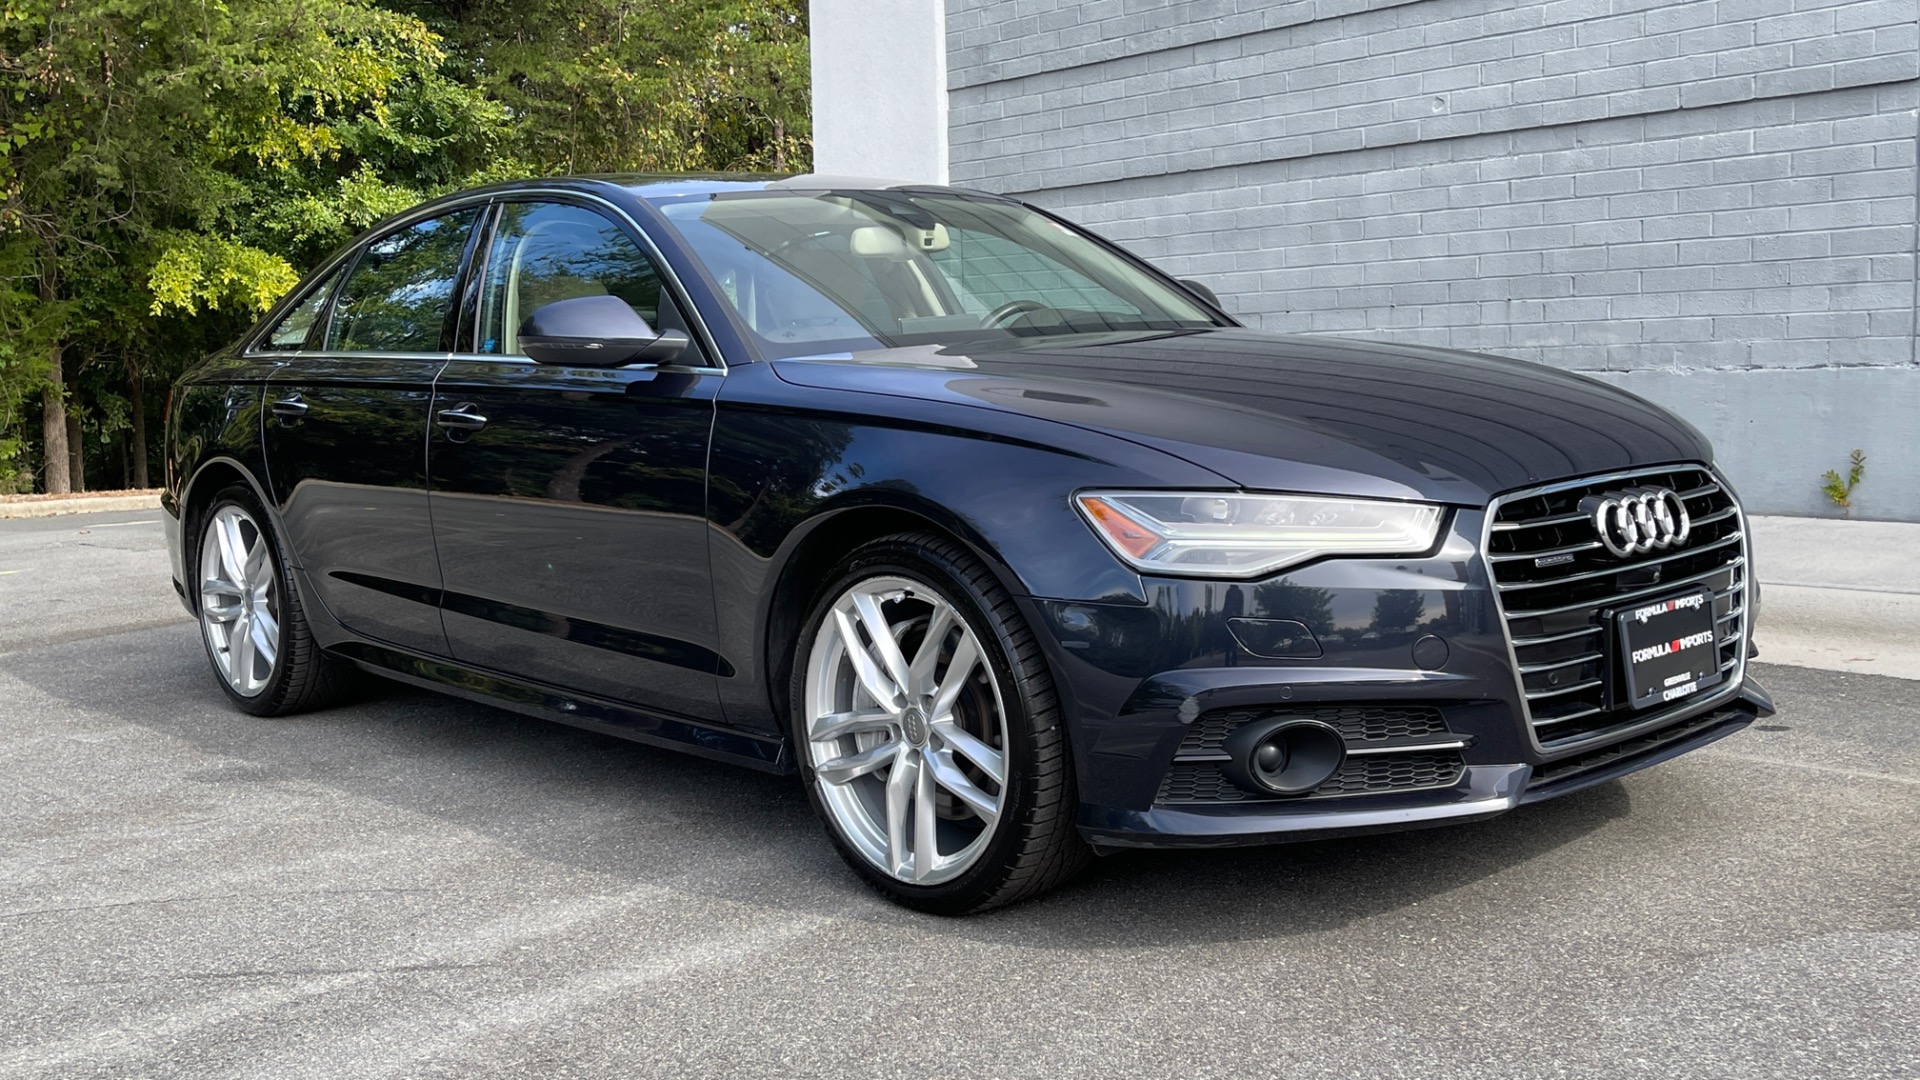 Used 2018 Audi A6 PRESTIGE / CONTOUR FRONT SEATS / MASSAGE / SUNROOF / LEATHER / AWD for sale $38,395 at Formula Imports in Charlotte NC 28227 6